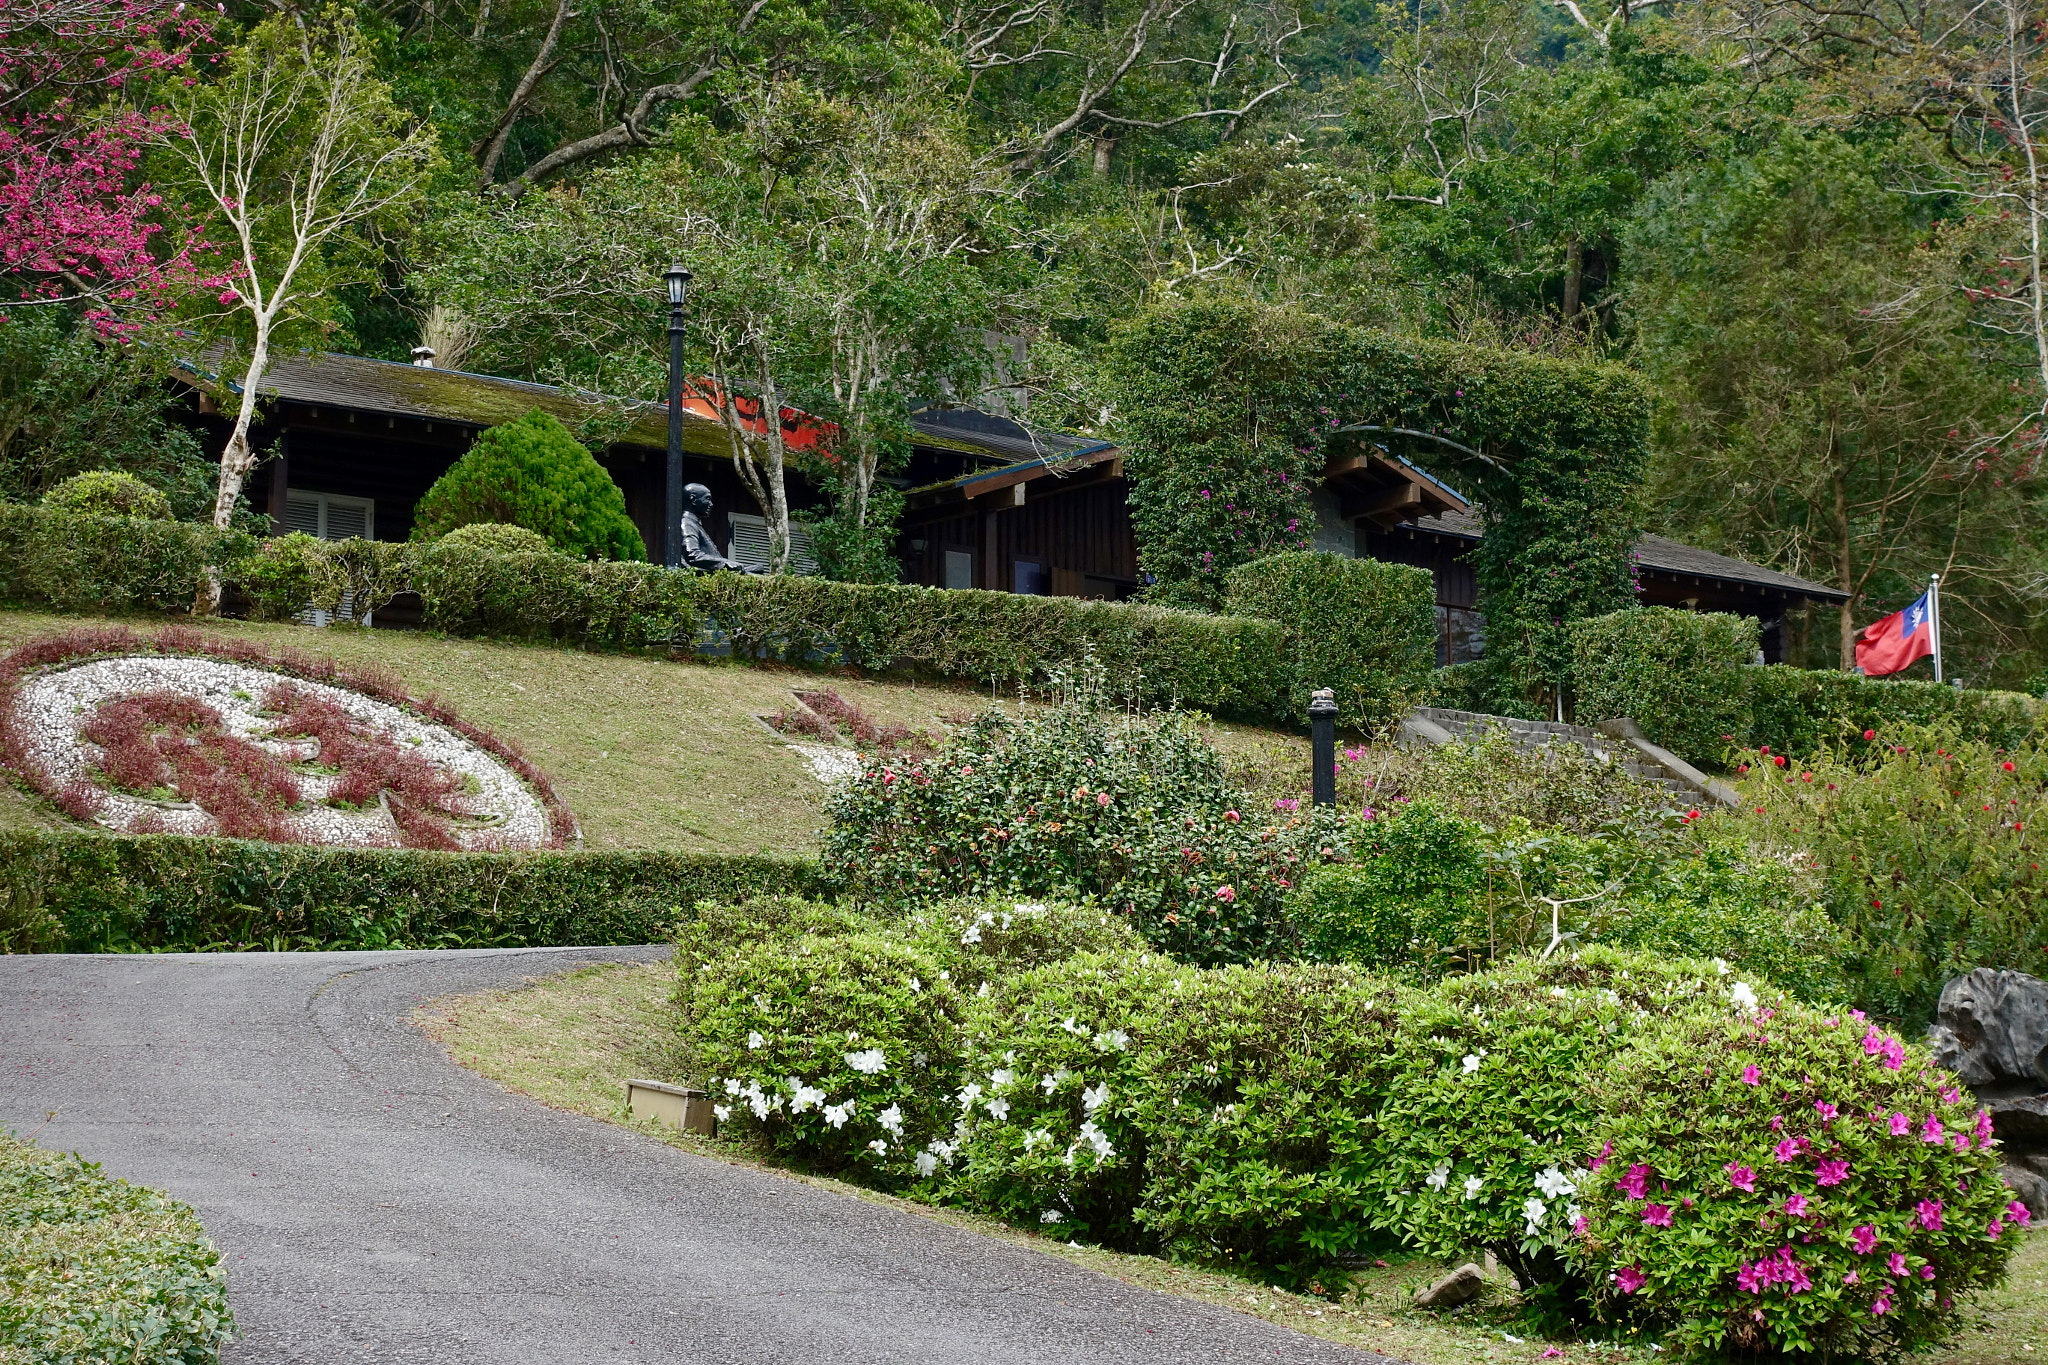 Sony DSC-RX100M5 sample photo. 棲蘭森林遊樂園區 蔣公行館 past president chiang's summer house in chilang, yilan, taiwan photography